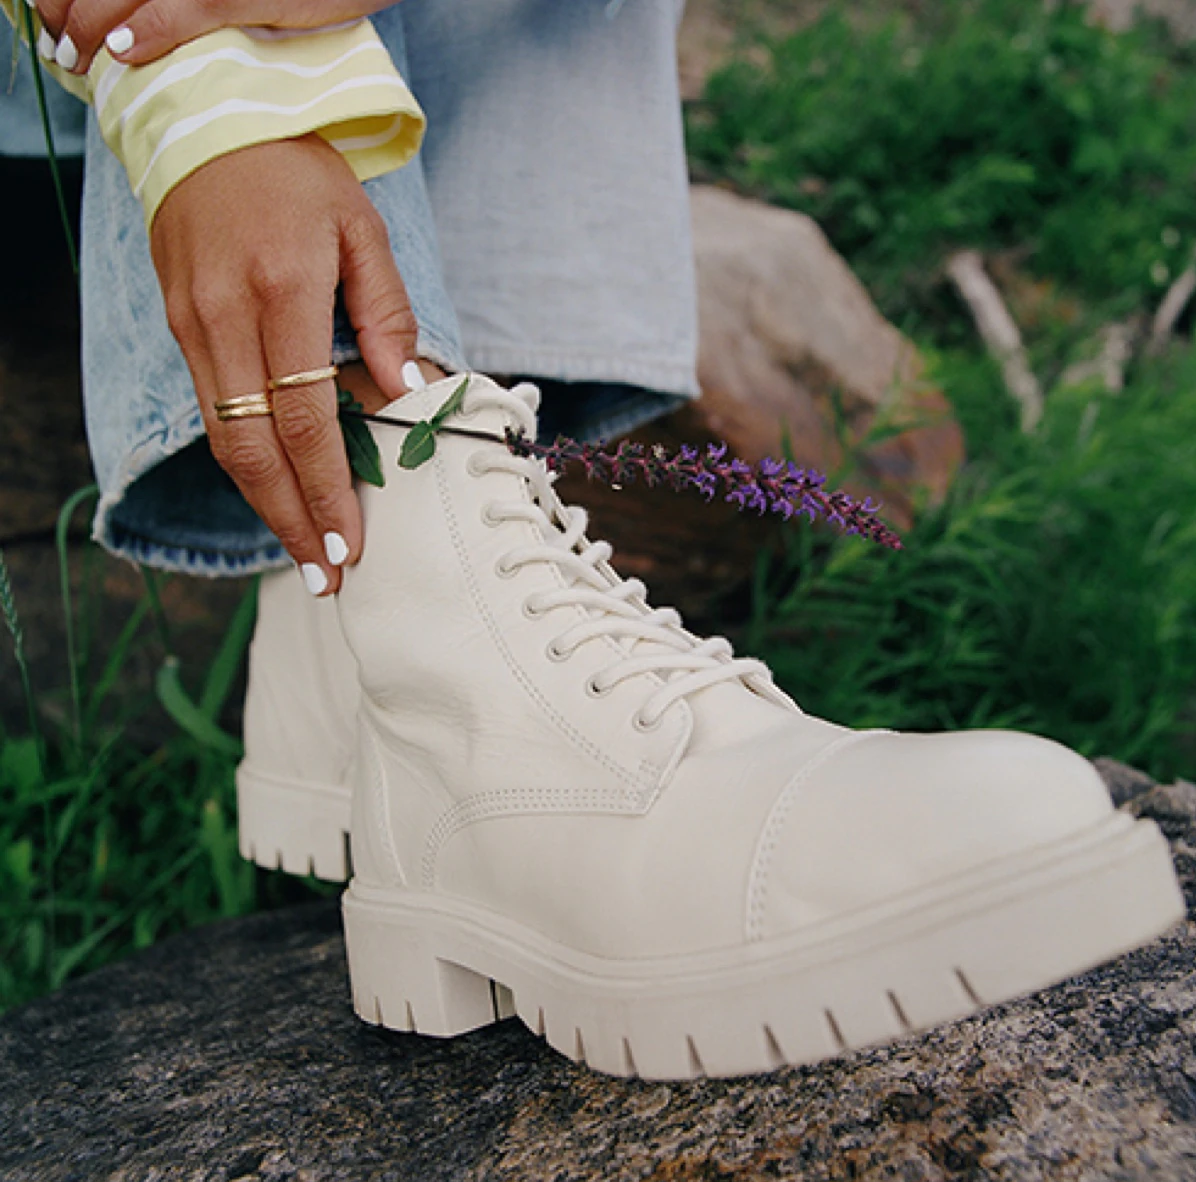 A person wearing chunky combat boots